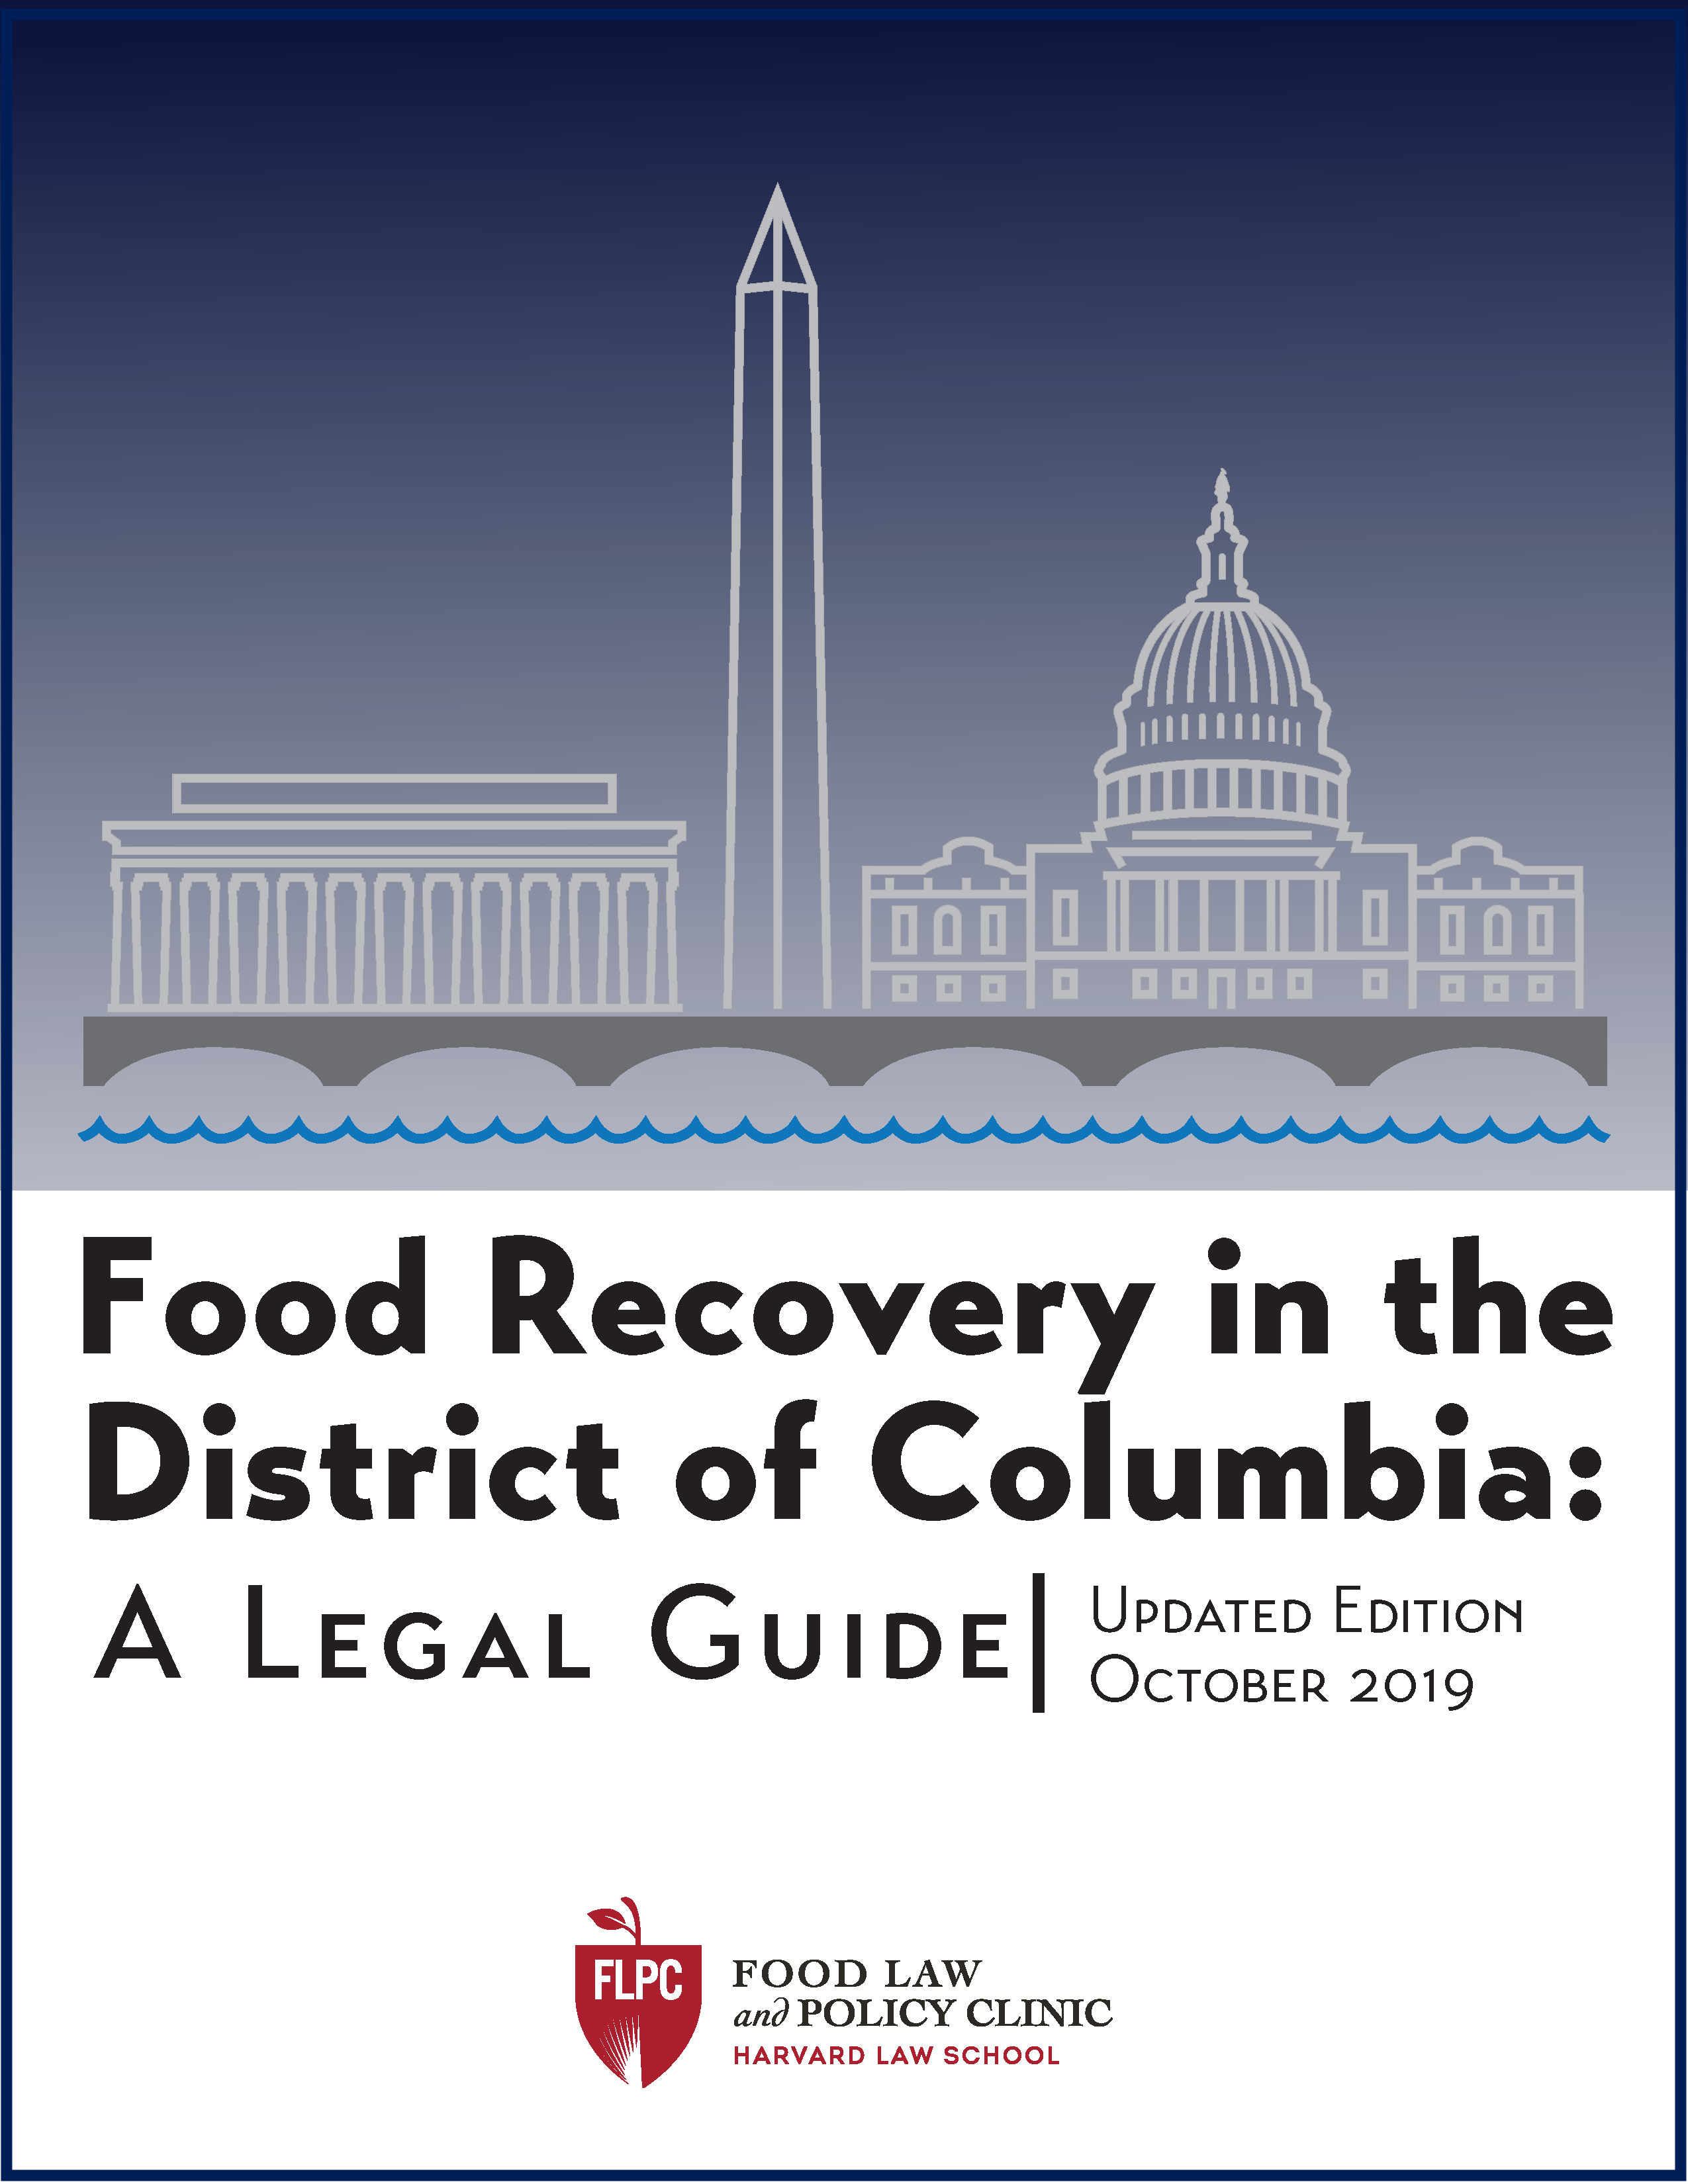 Food Recovery in D.C. Legal Guide, 2019 Edition